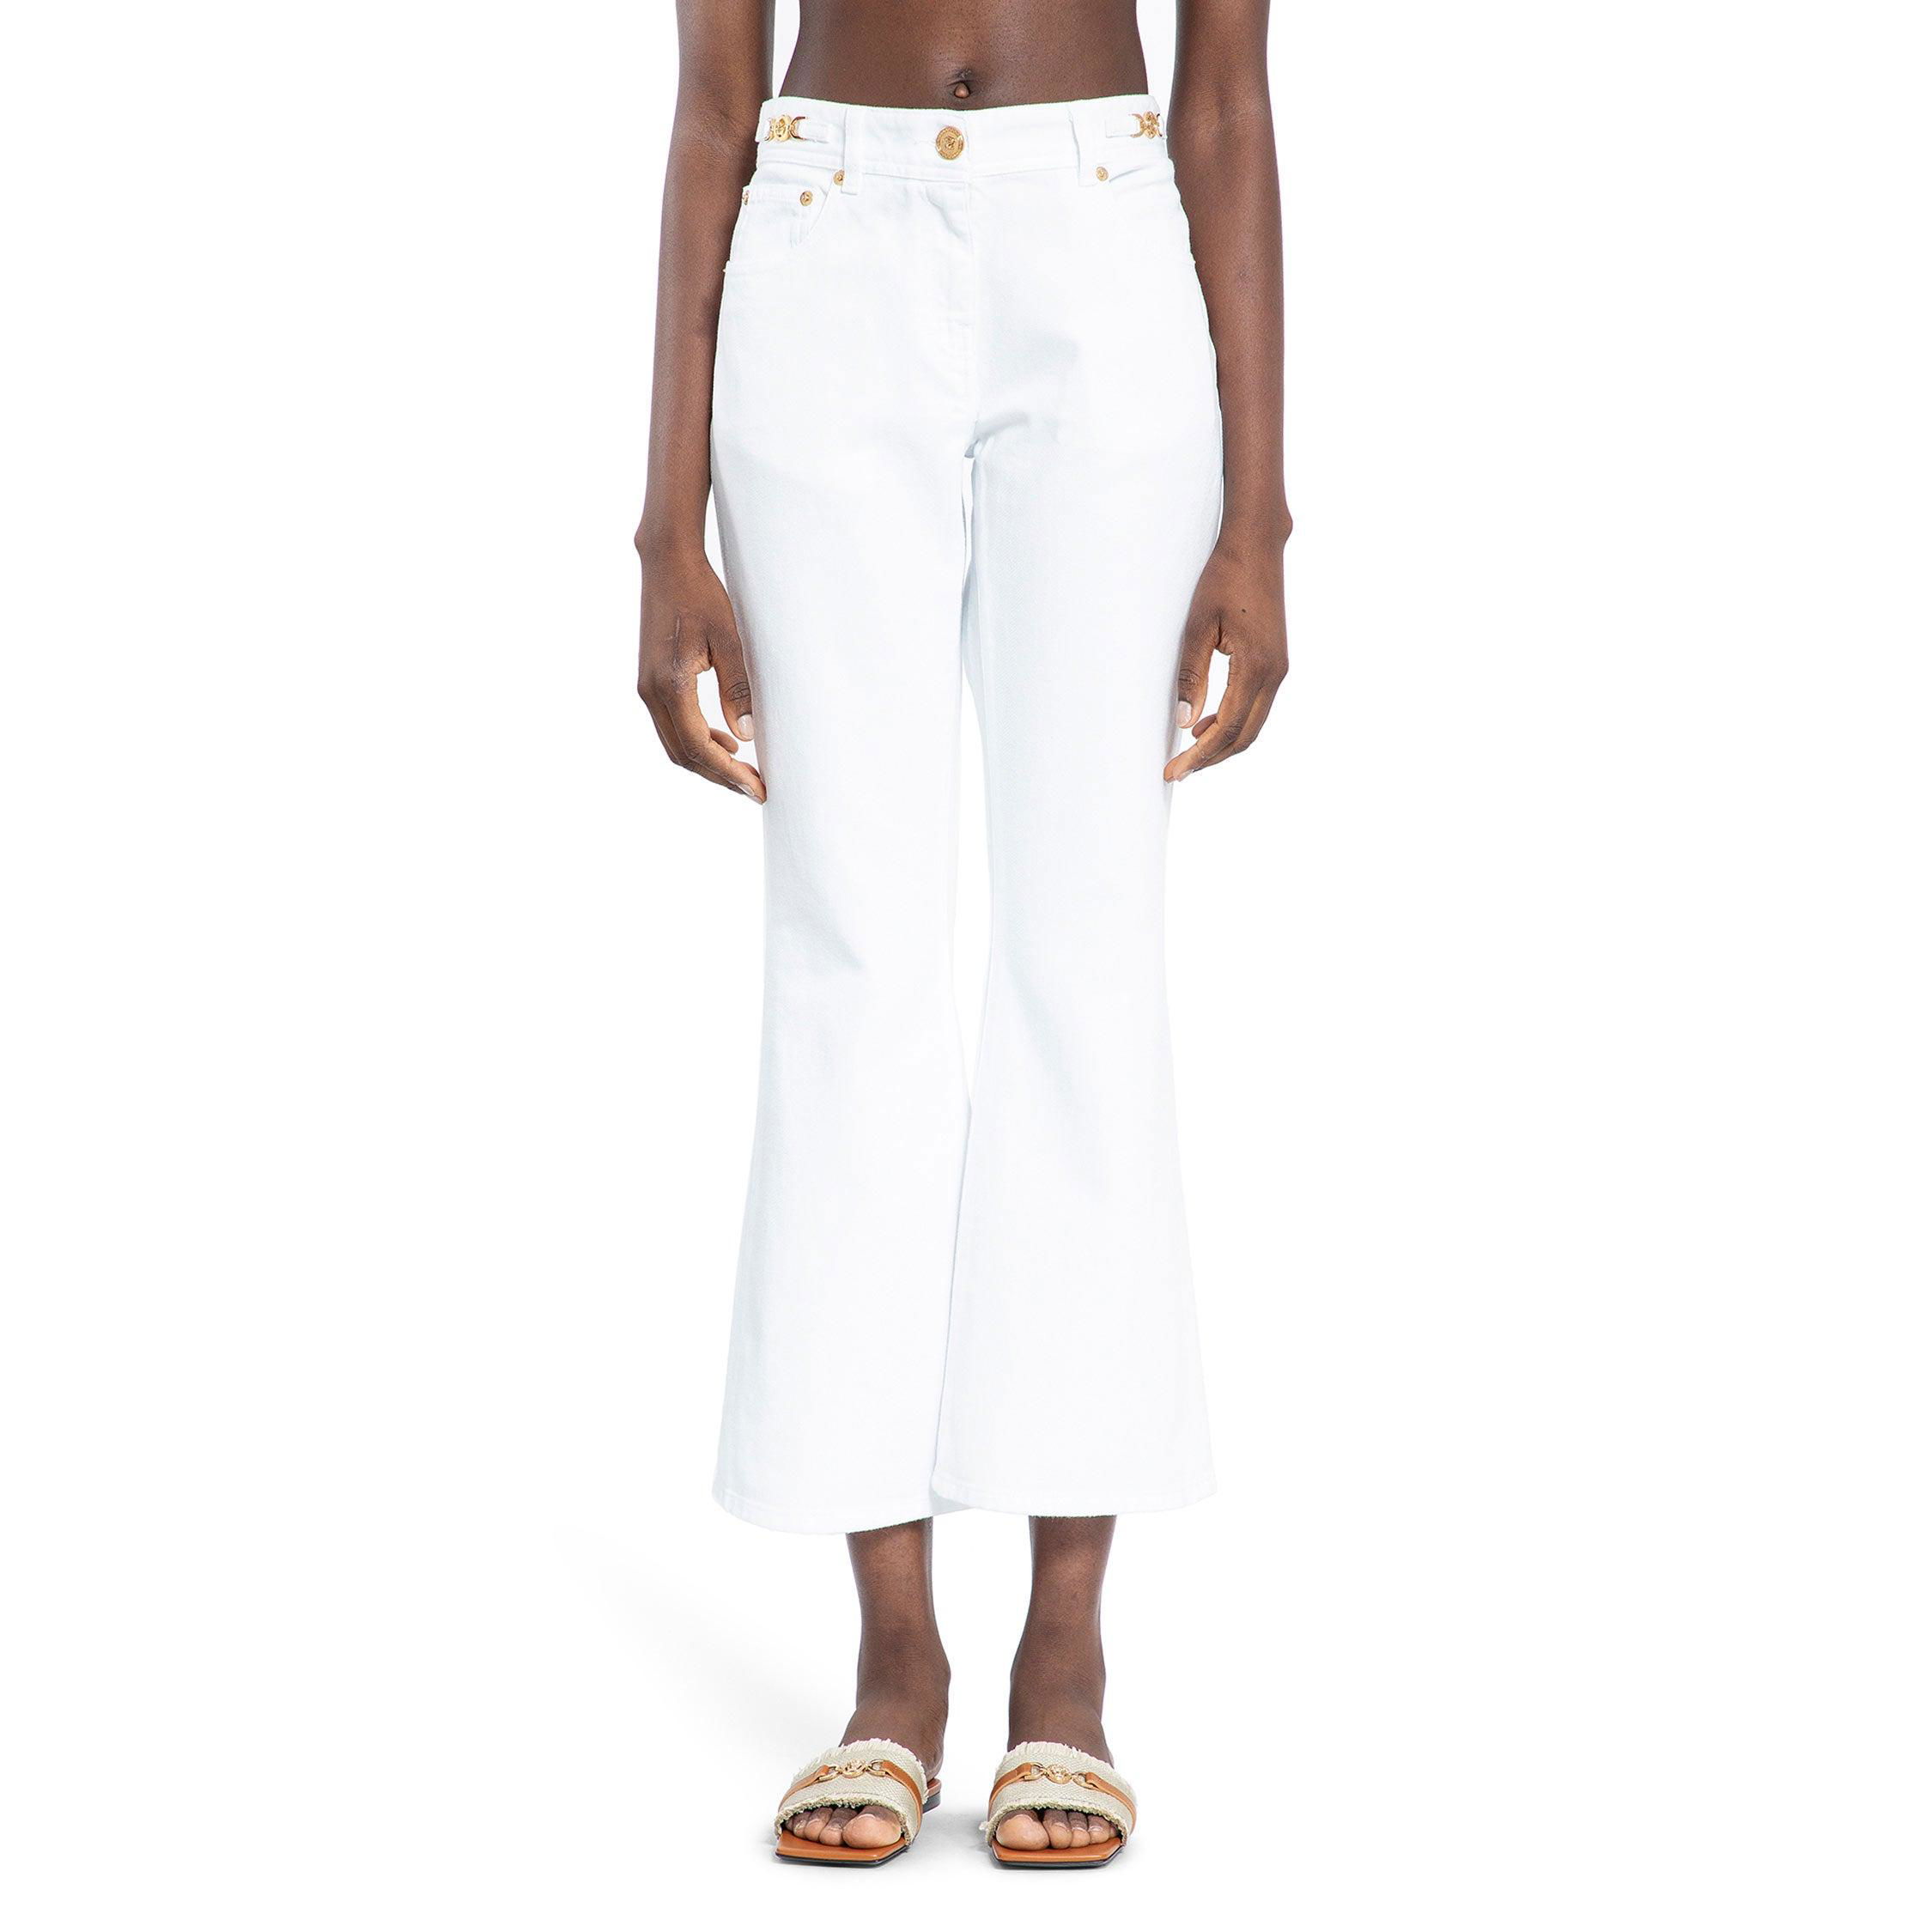 VERSACE WOMAN WHITE JEANS by VERSACE